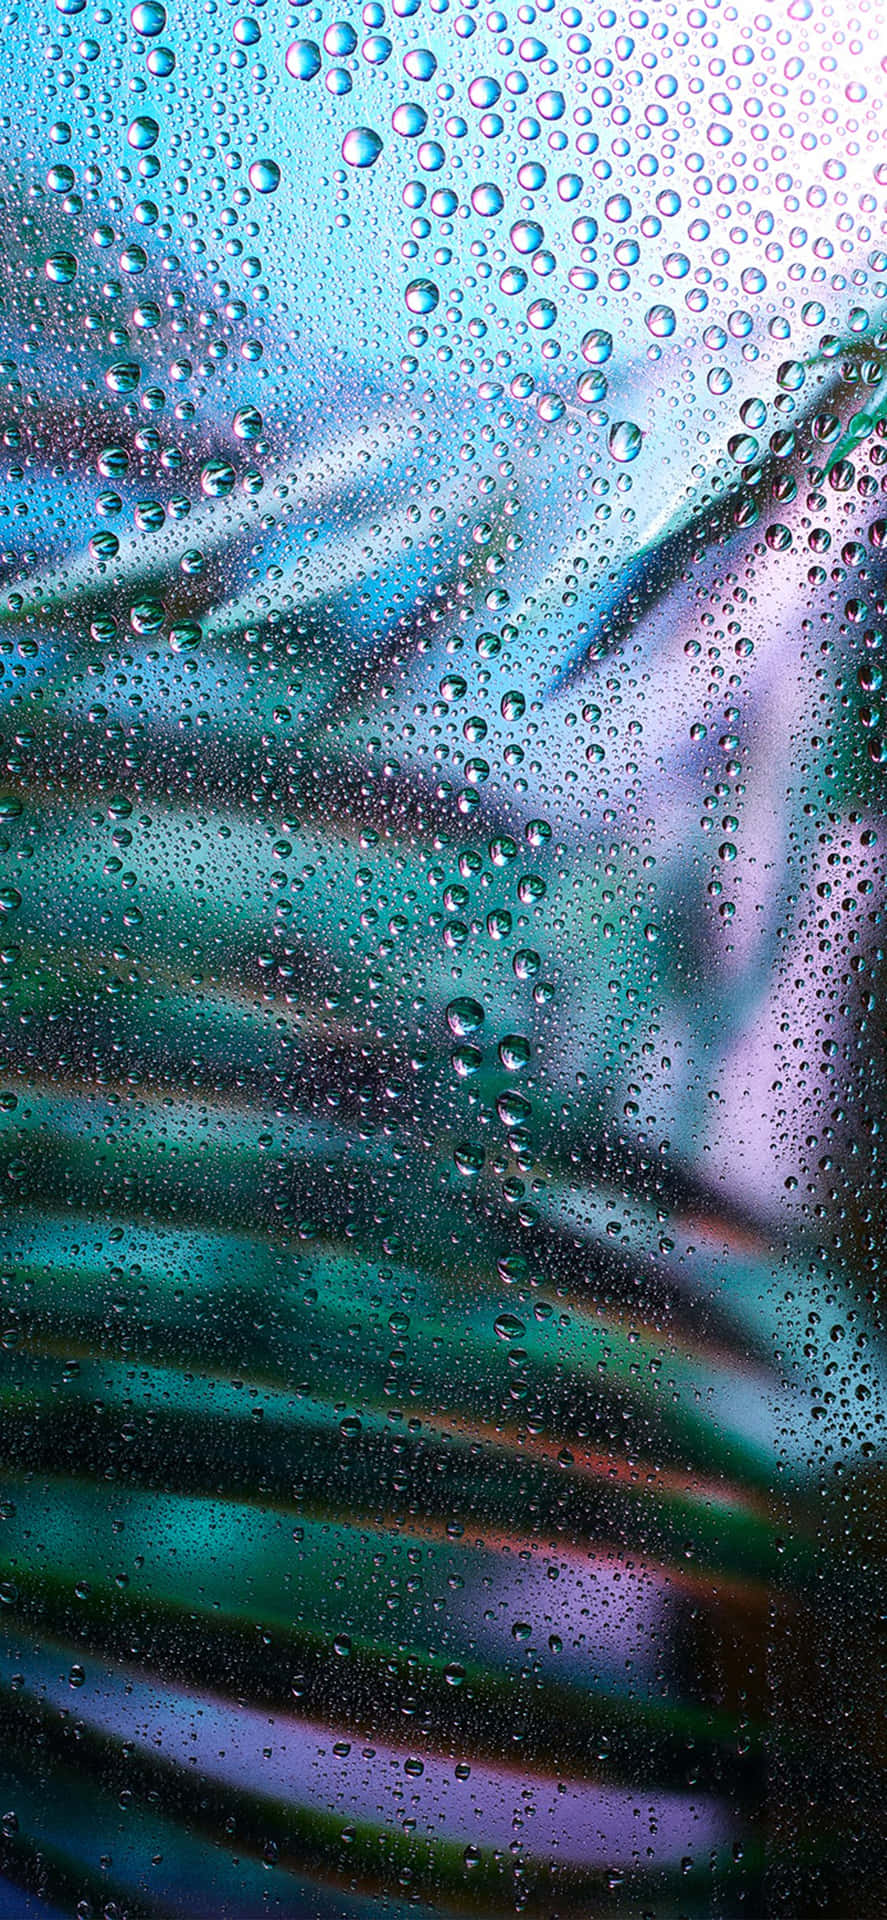 Exotic Water Droplets [wallpaper]